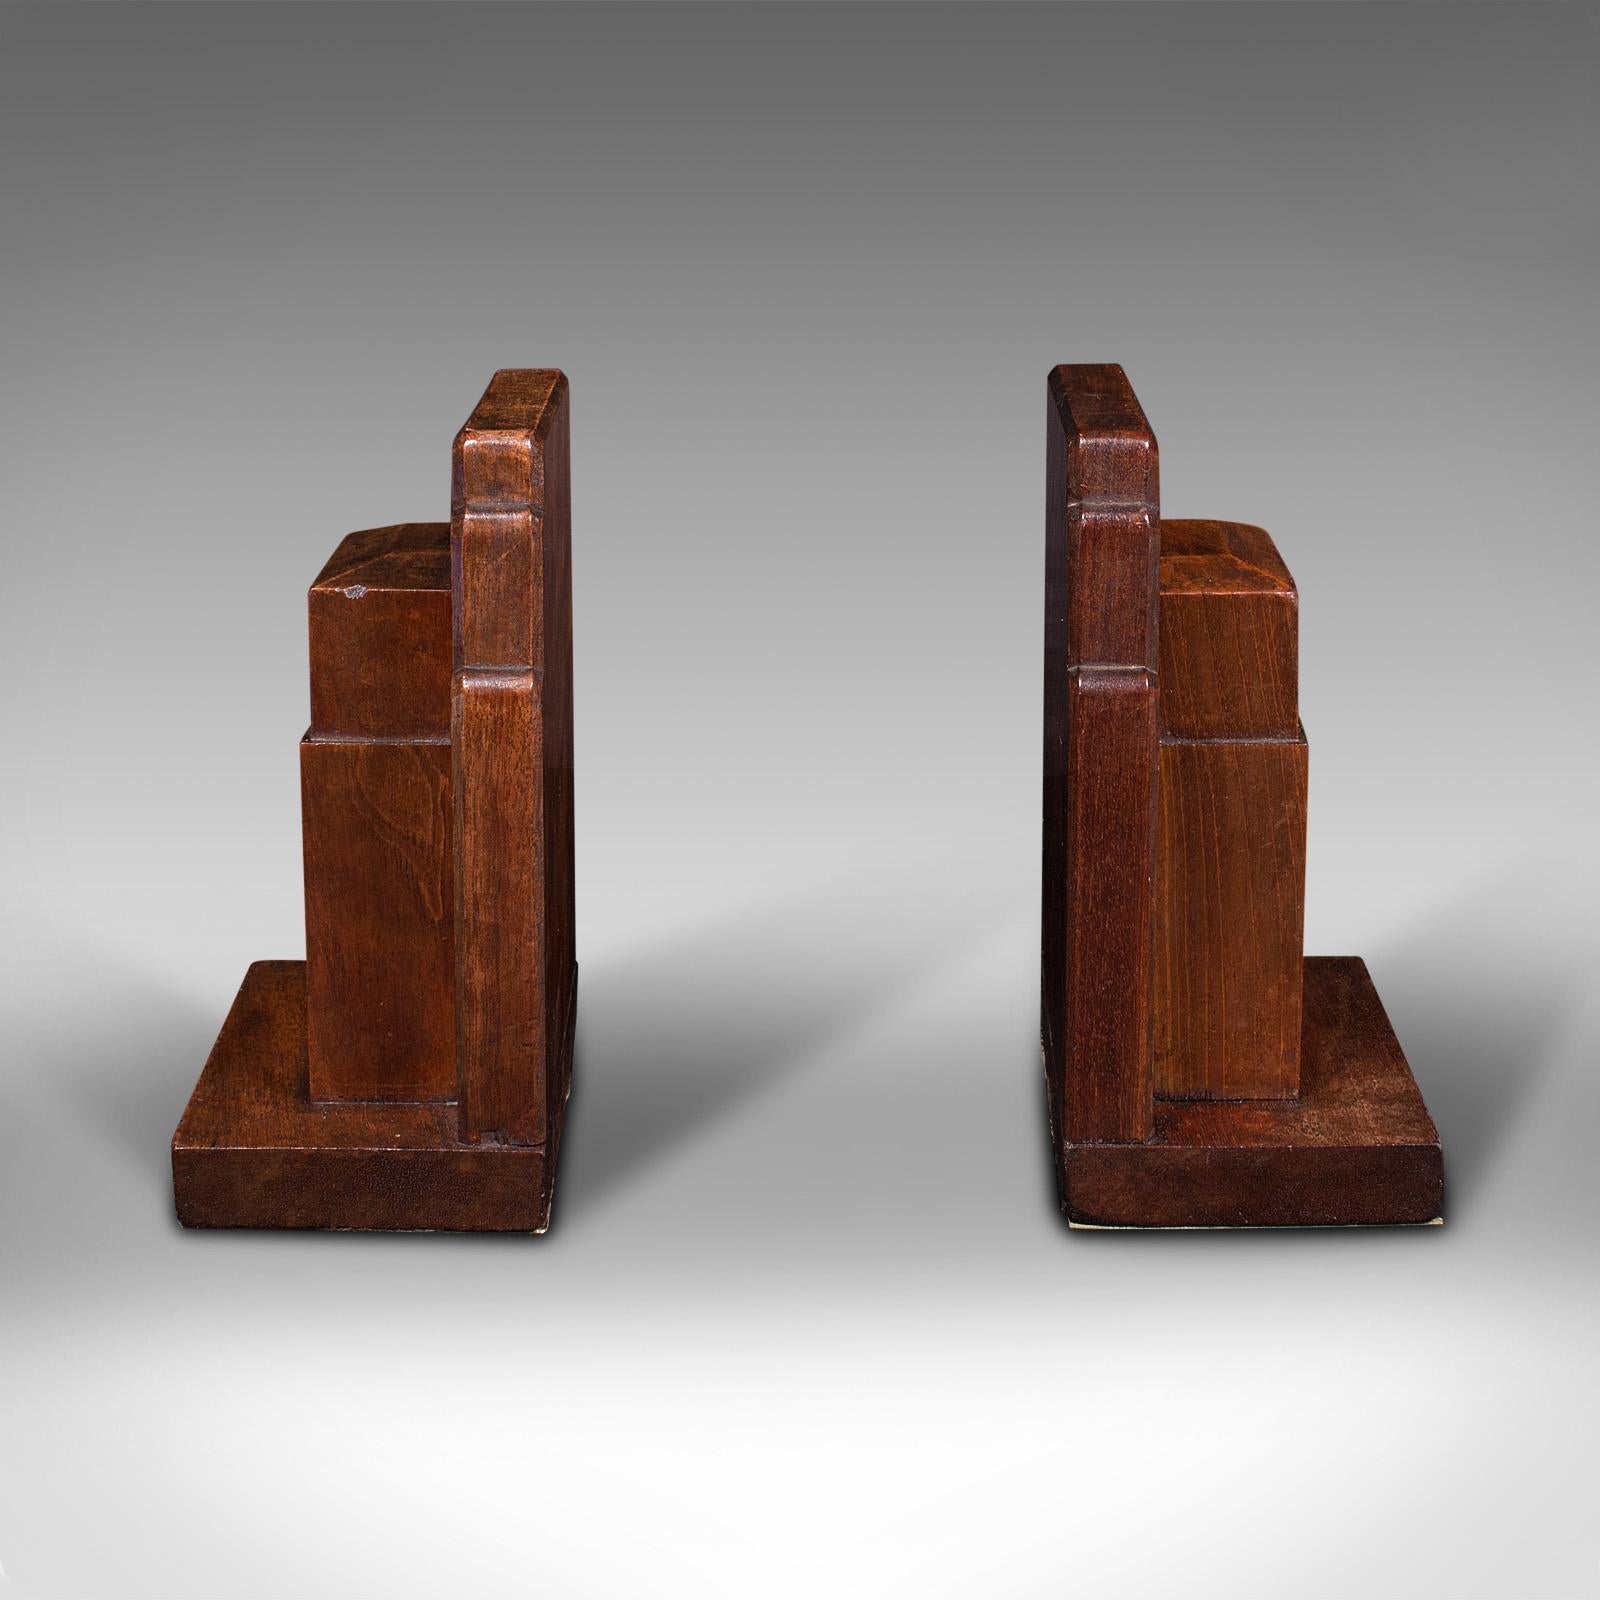 This is a vintage pair of decorative bookends. An English, walnut book rest by Gordon Russell Limited, dating to the early 20th century, circa 1930.

A dashing bookend set, with overtones of Russell's influence by the Arts & Crafts